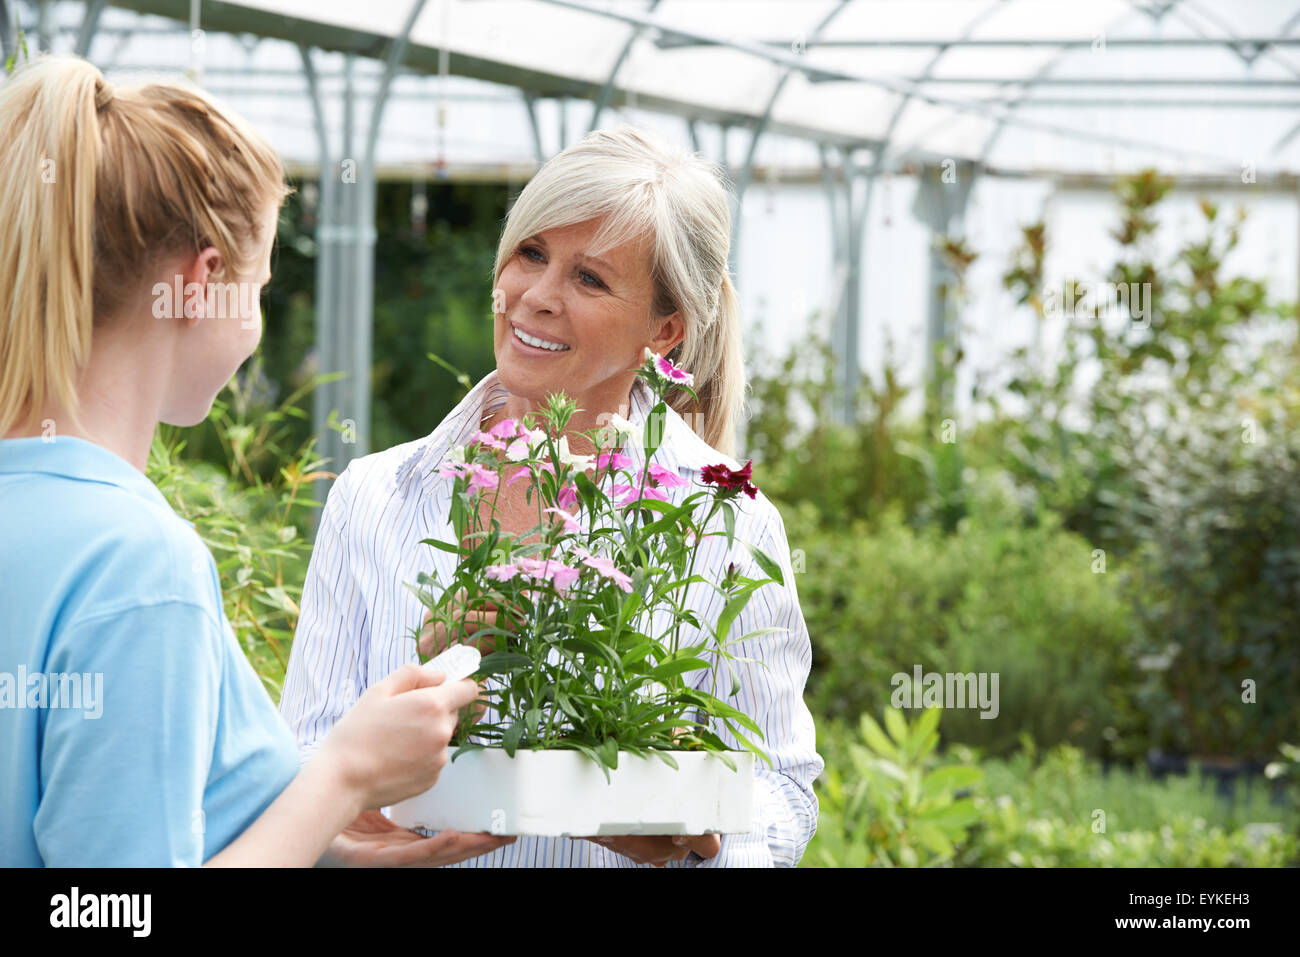 Staff Giving Plant Advice To Female Customer At Garden Center Stock Photo